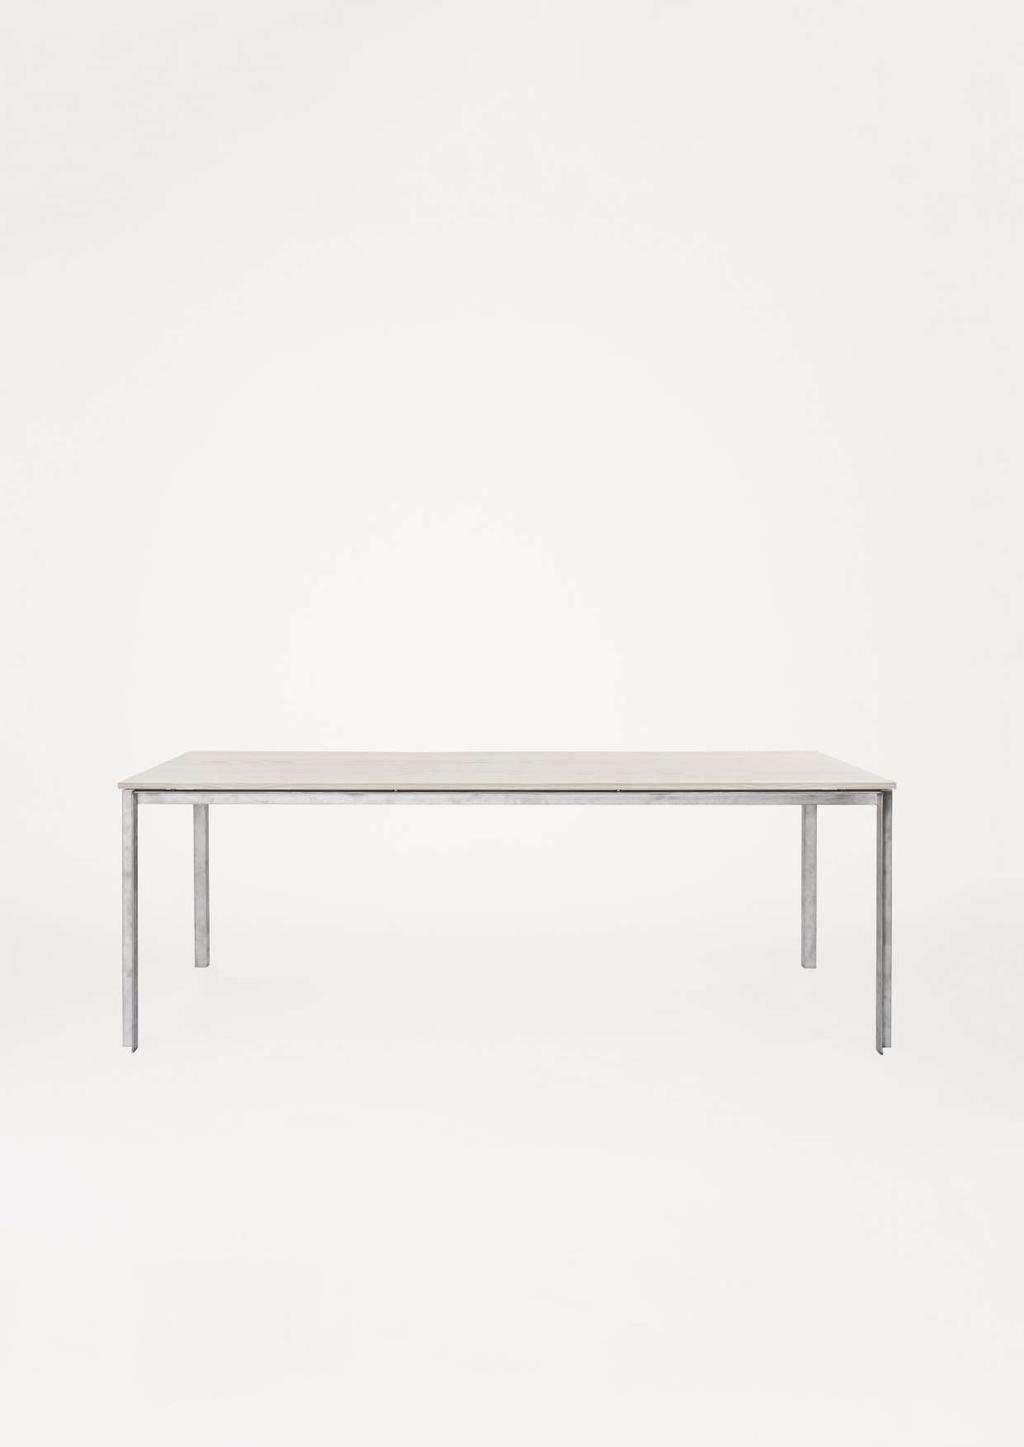 2000 850 738 STUDIO TABLE Design Year 2013 Typology Collection Origin Material Top Material Base Christian Bjørn Dining/Office Table